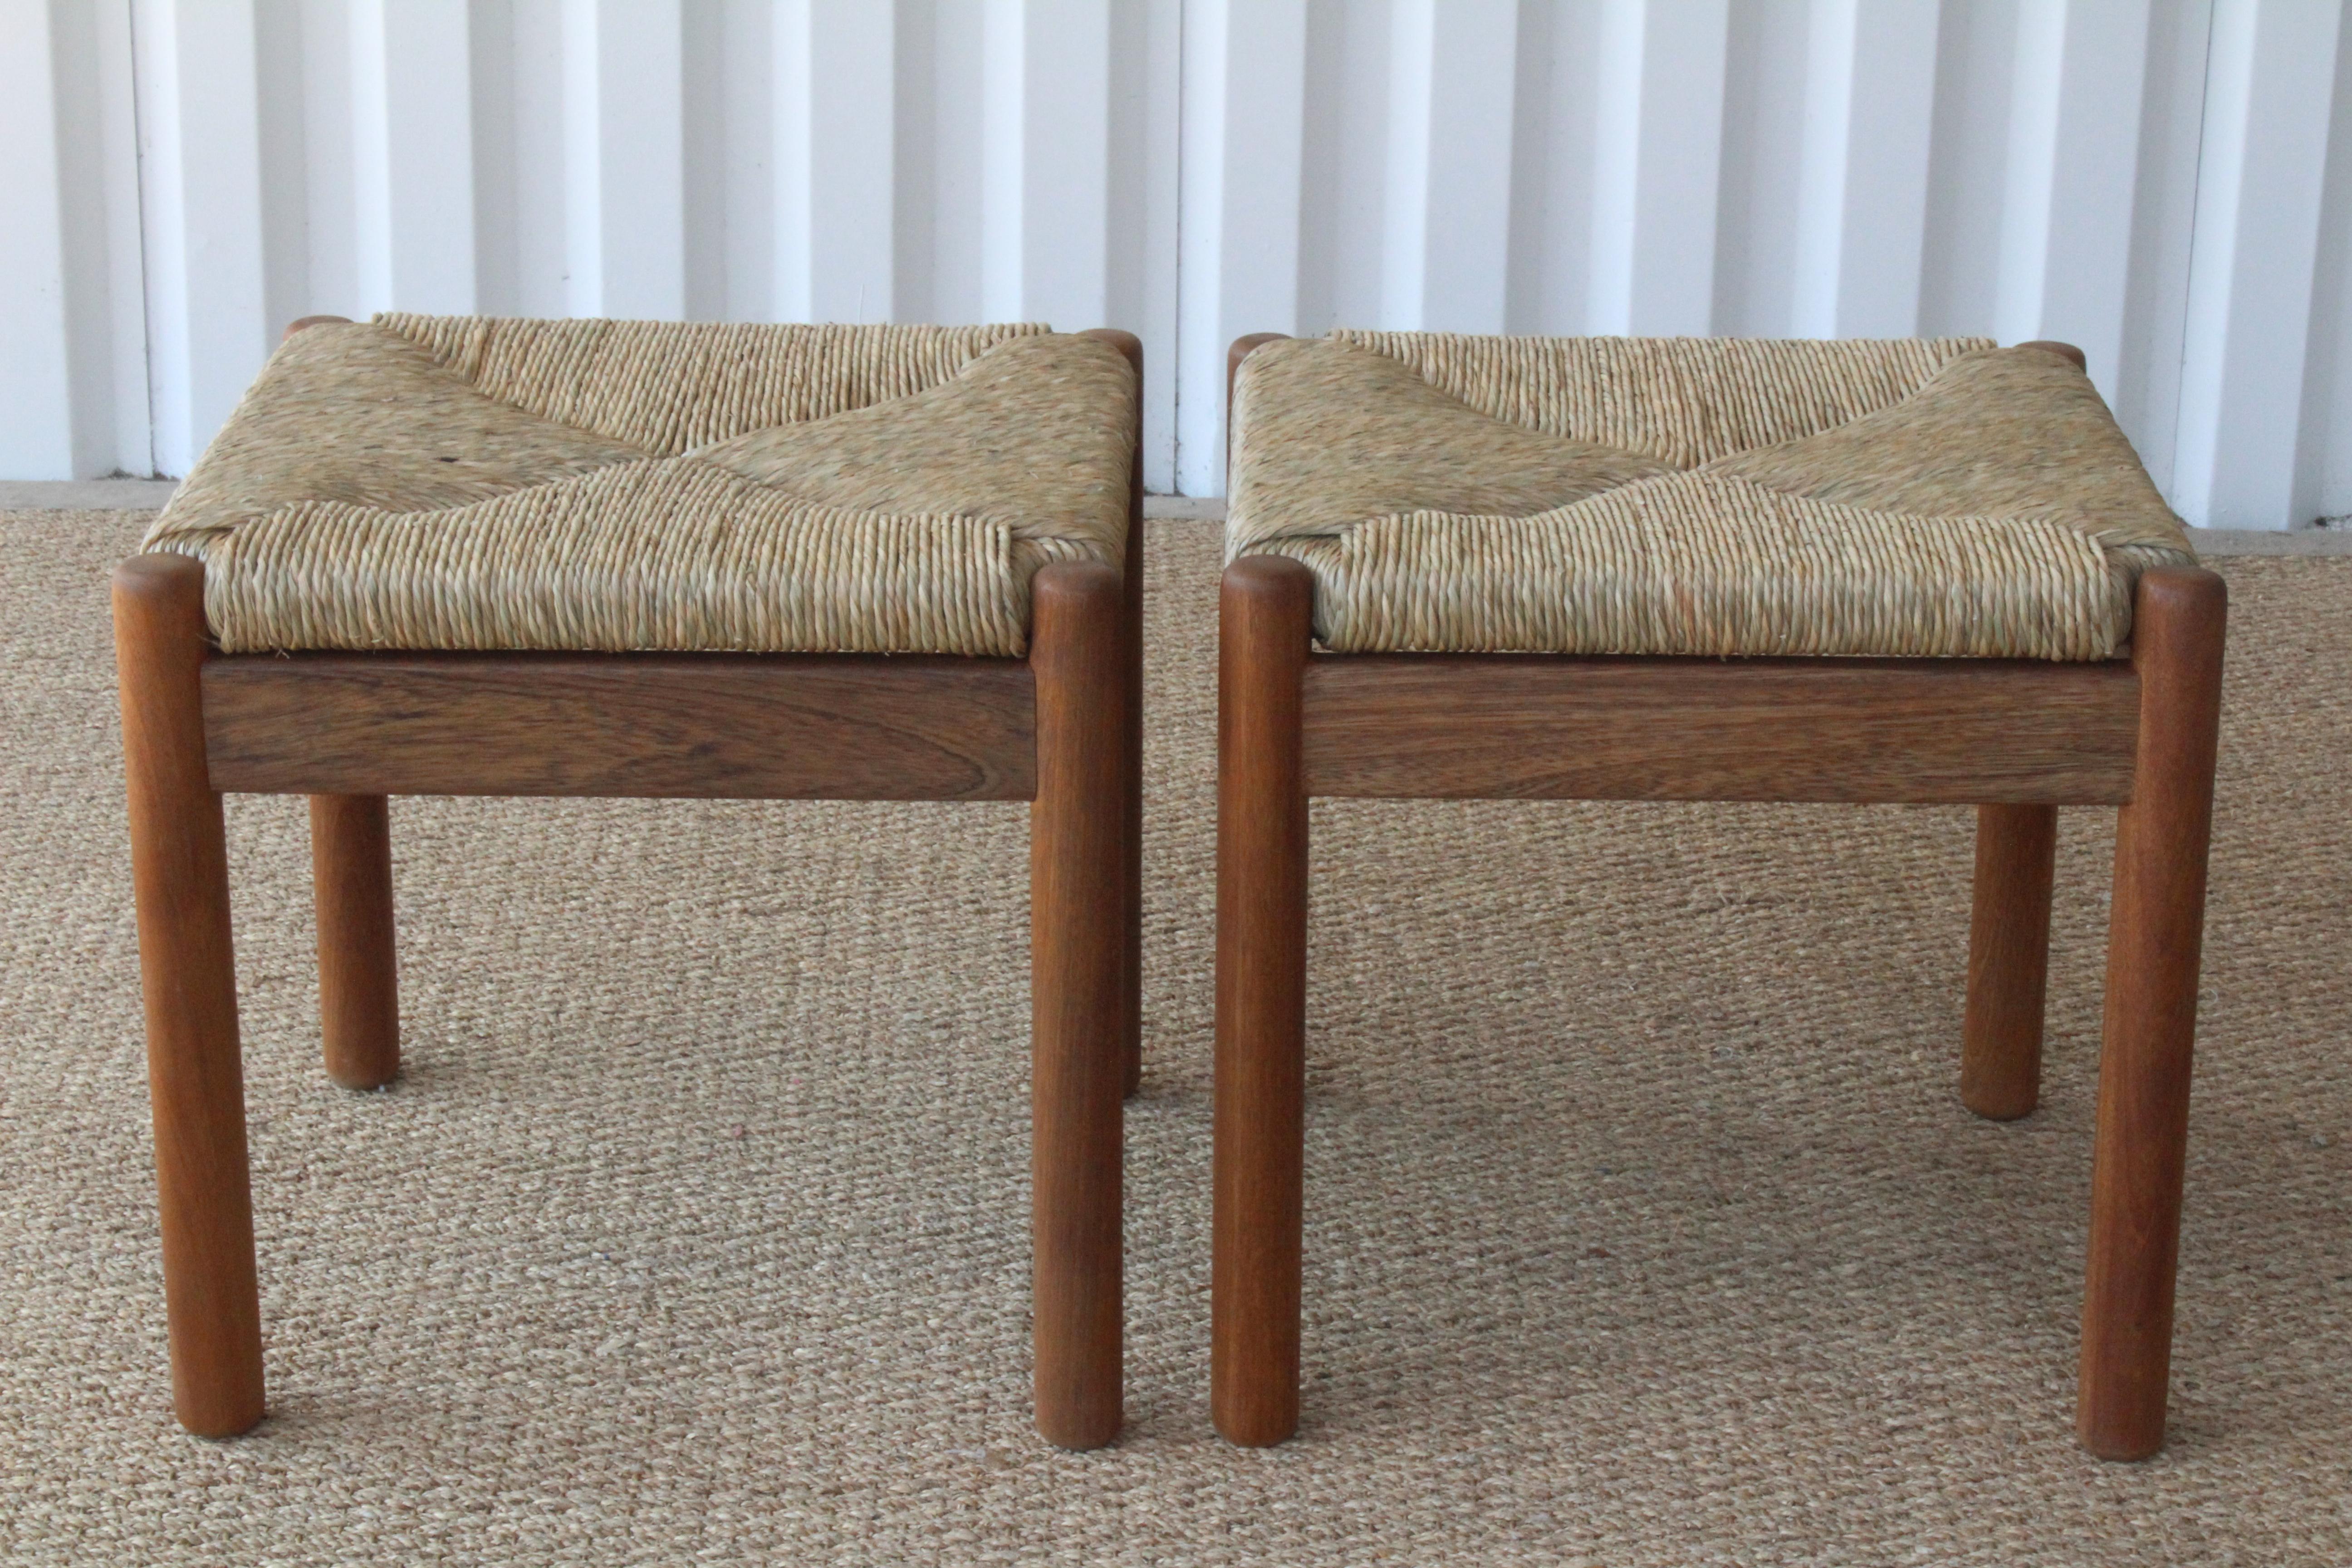 Pair of vintage 1960s Danish stools in walnut with newly woven rush seats. The walnut has been refinished in a natural oil stain. Rush is natural. Excellent condition. Sold as a pair.